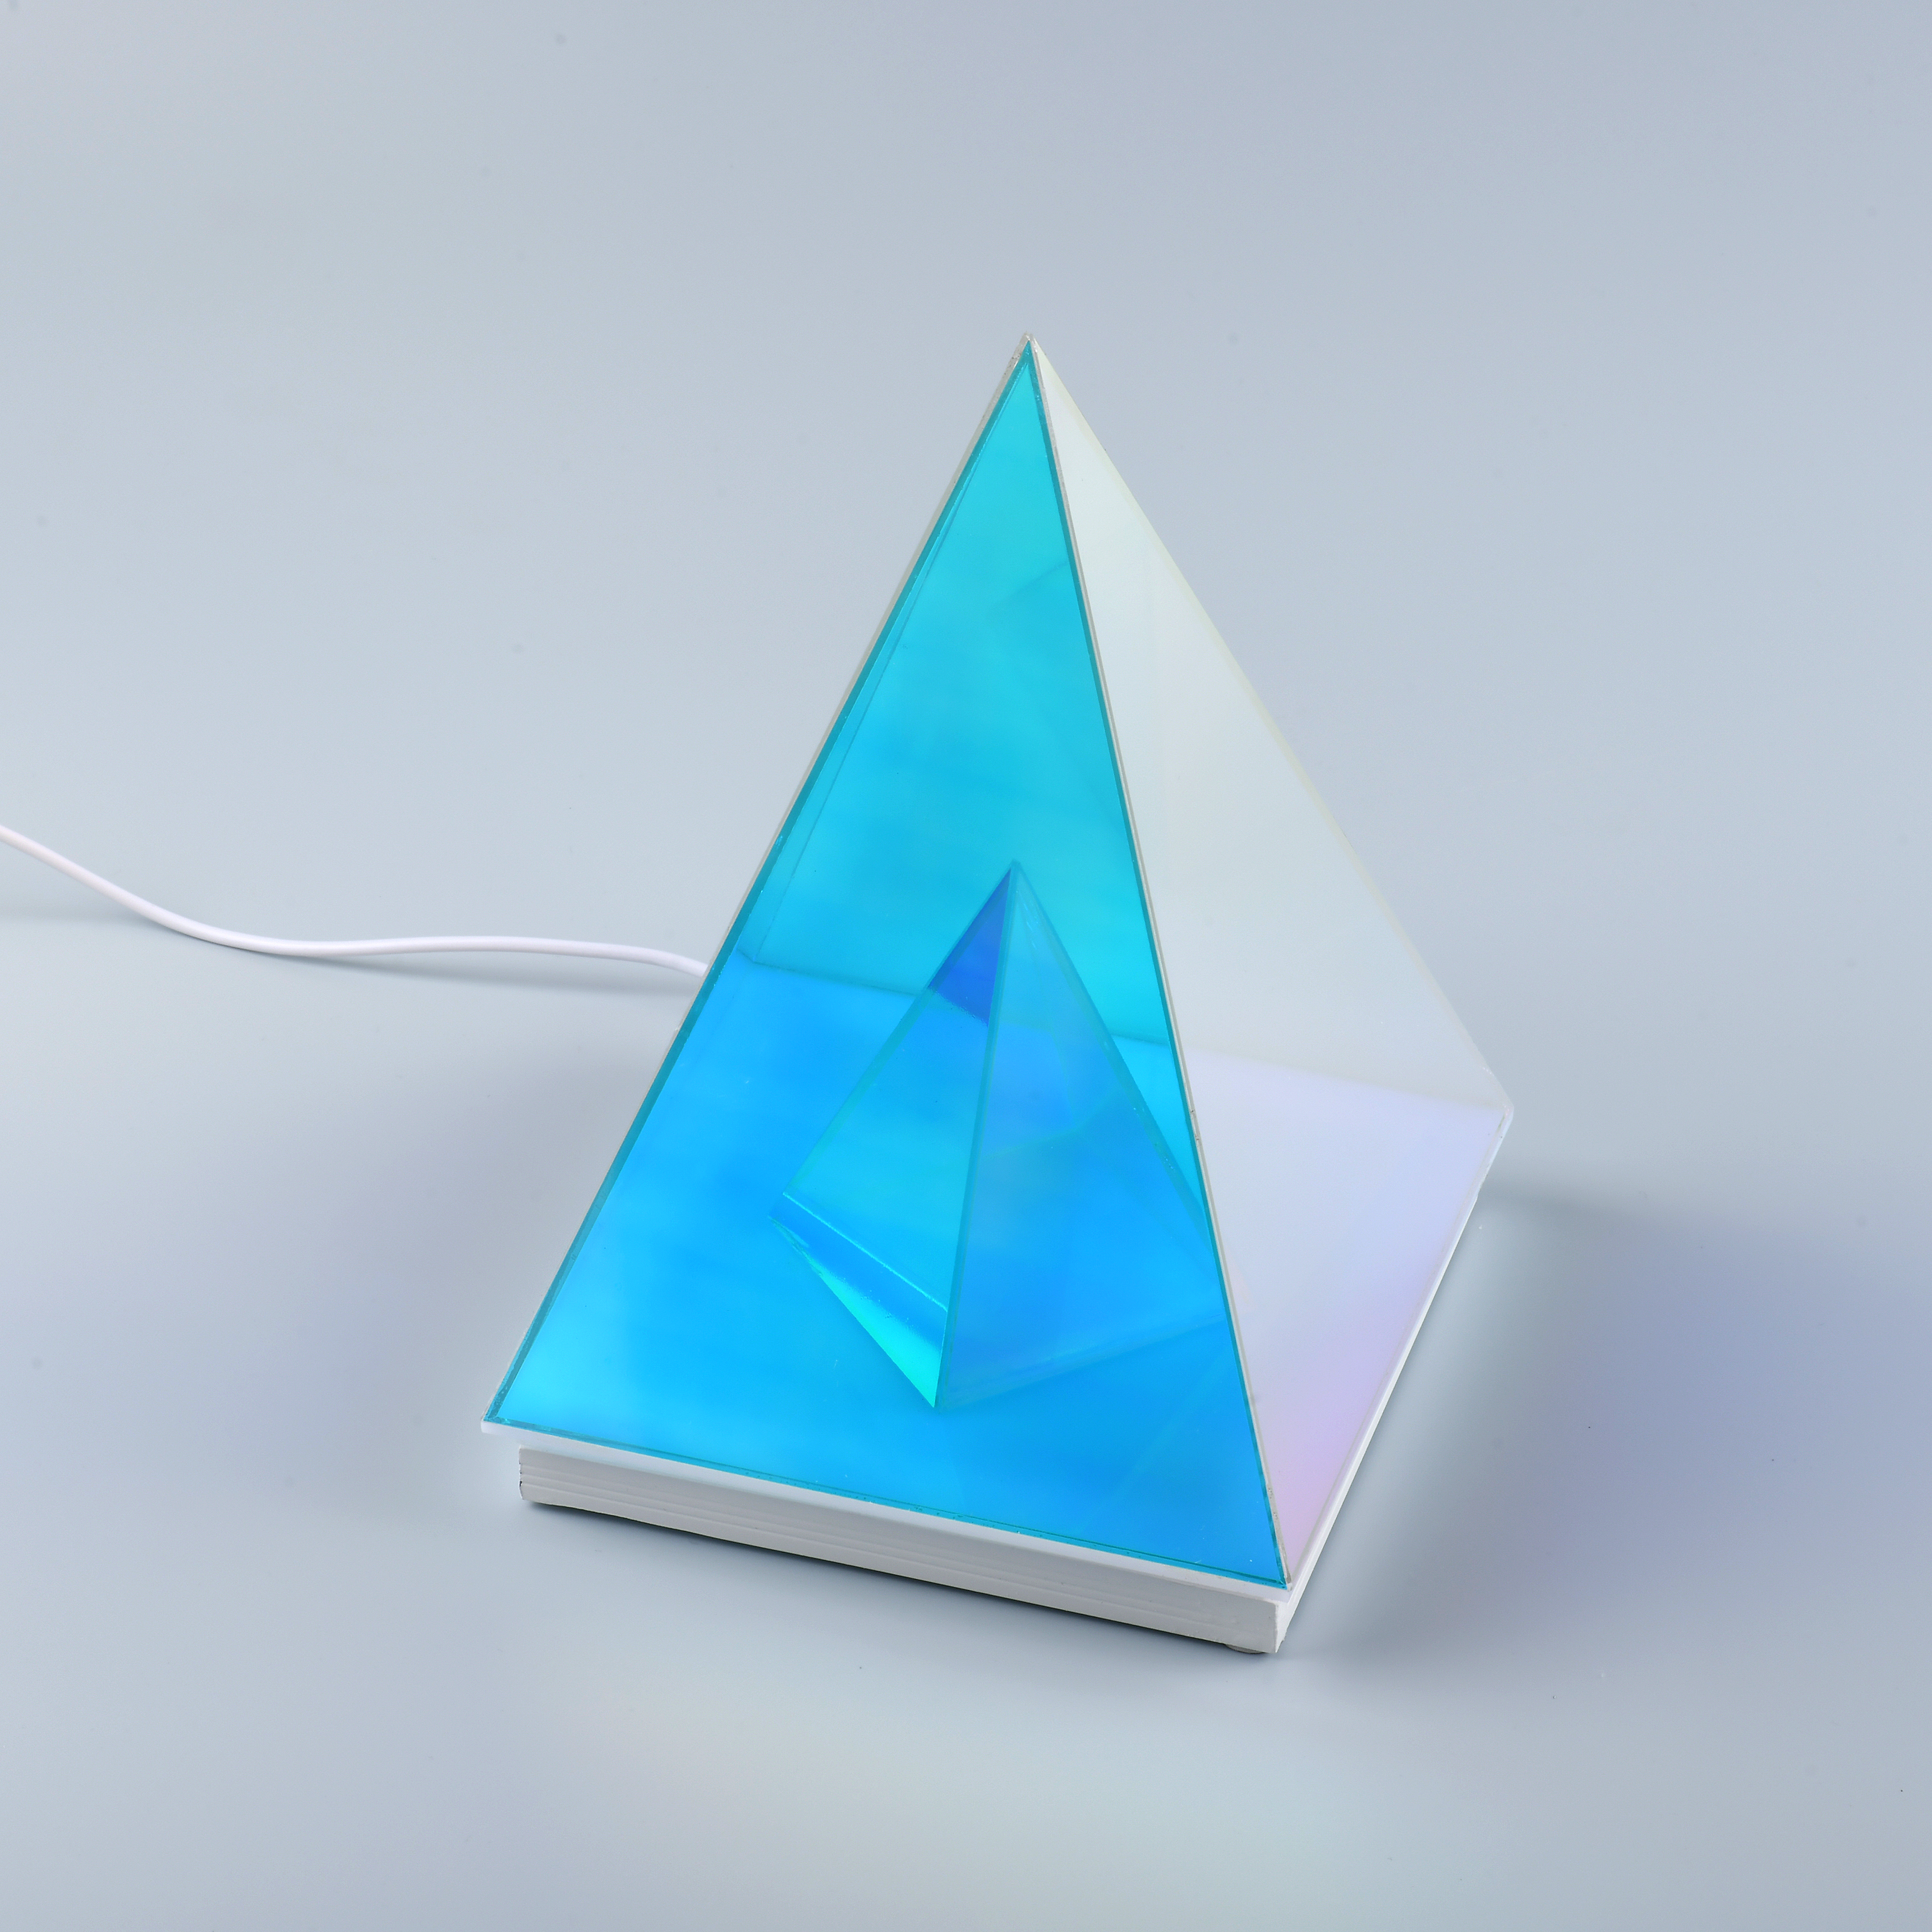 Infinity Pyramid Lamp: Transform Your Space With Reflective 